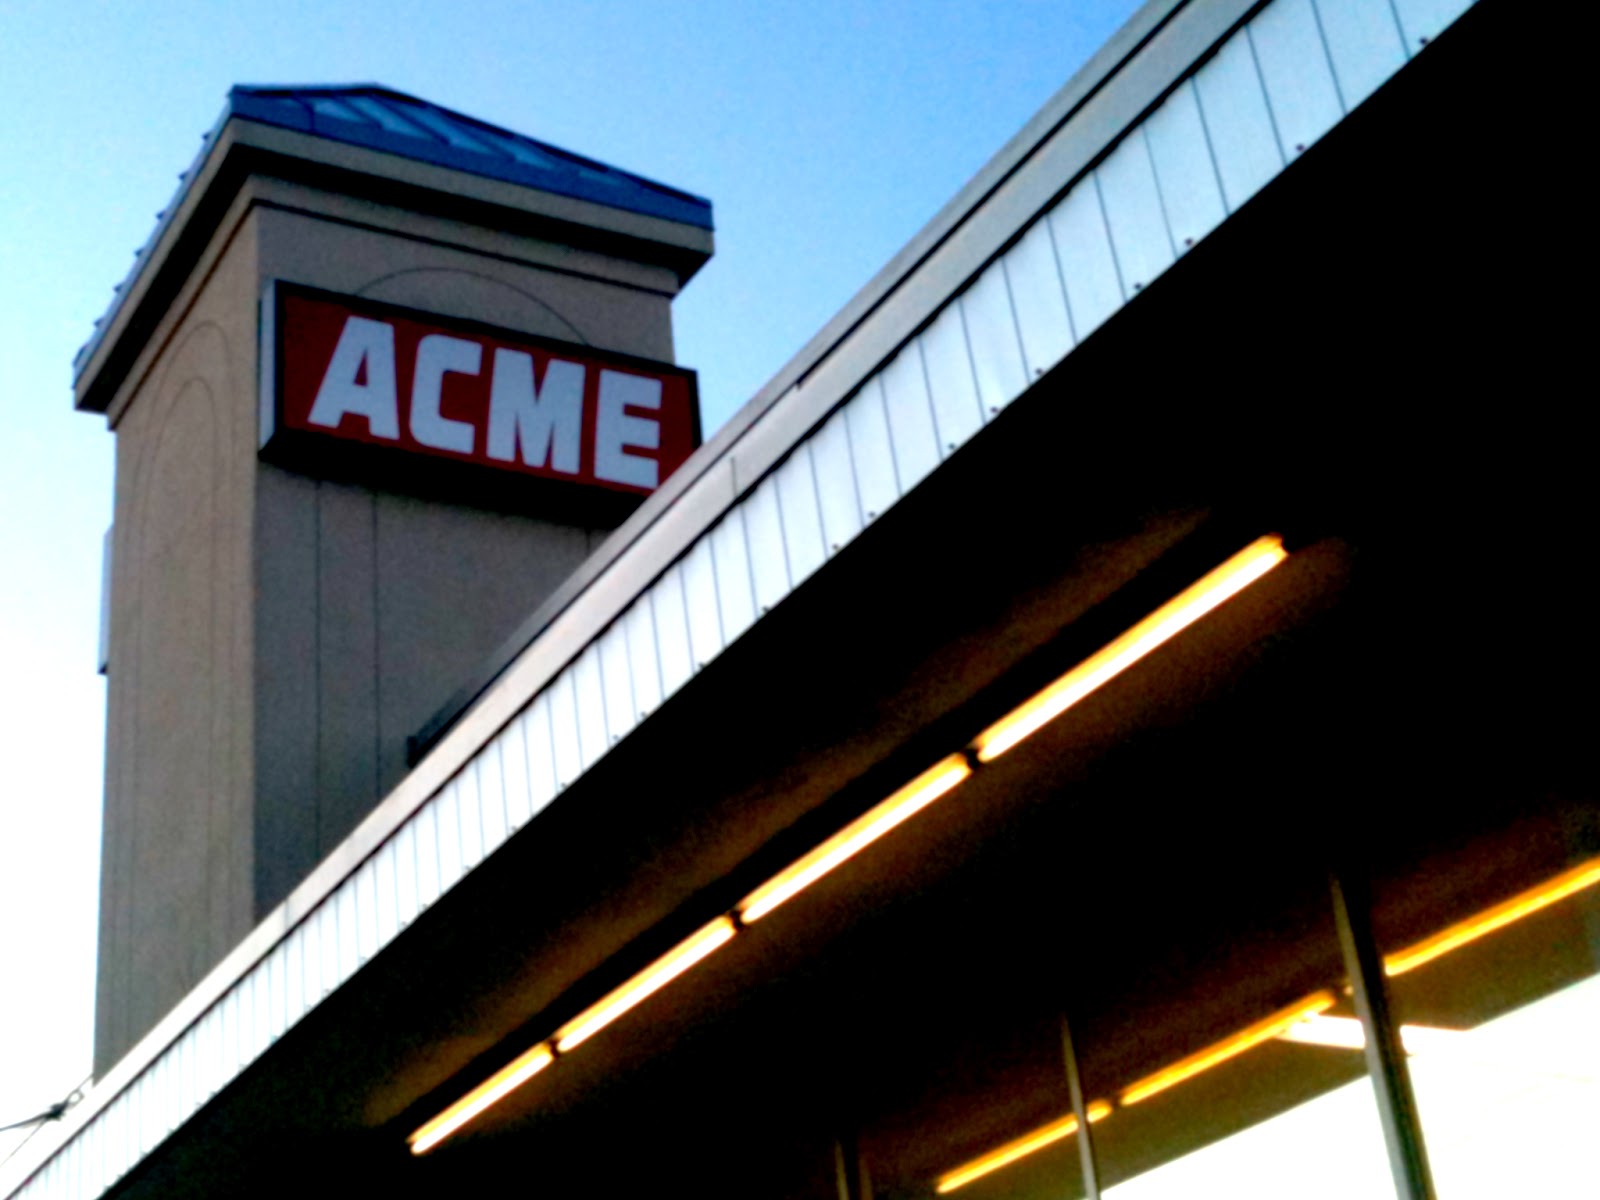 Go see this Acme. Who knows how much longer it will be around. I 